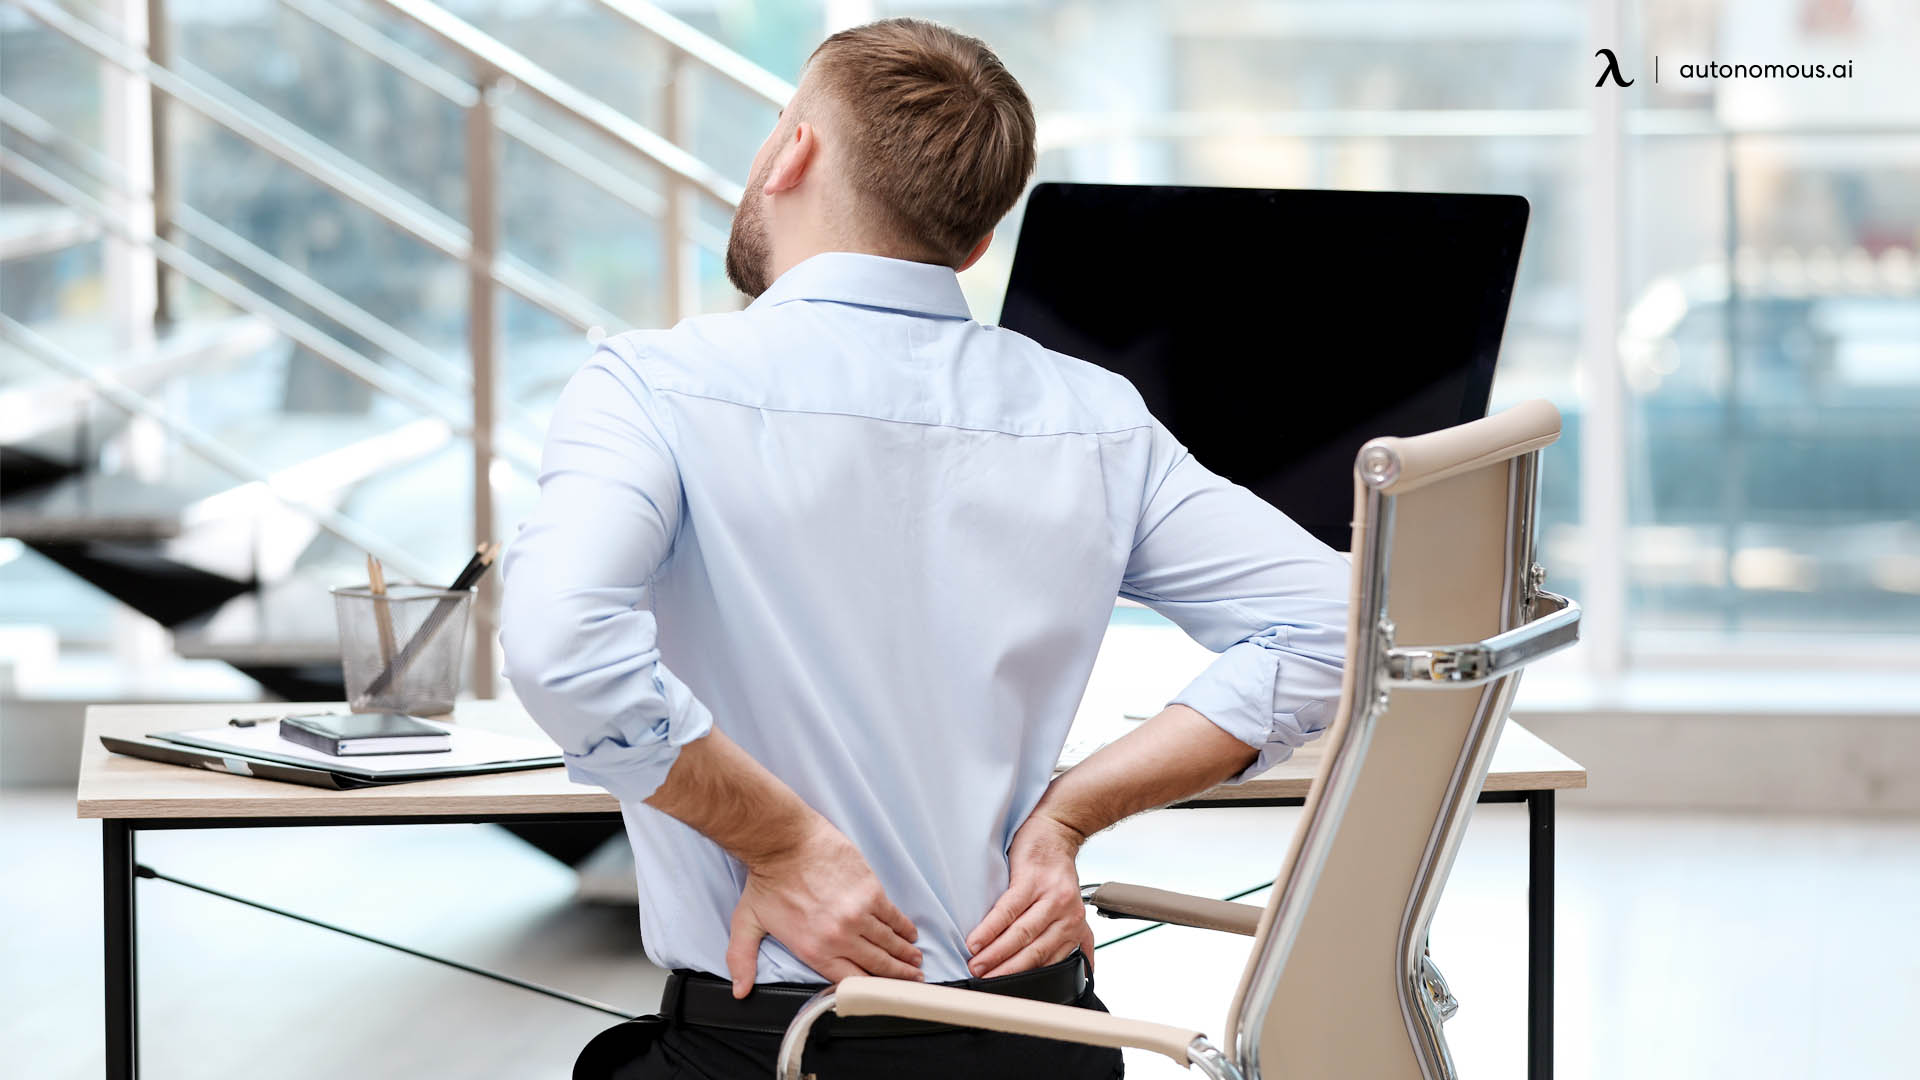 15 Best Office Chairs for Lower Back Pain in 2022